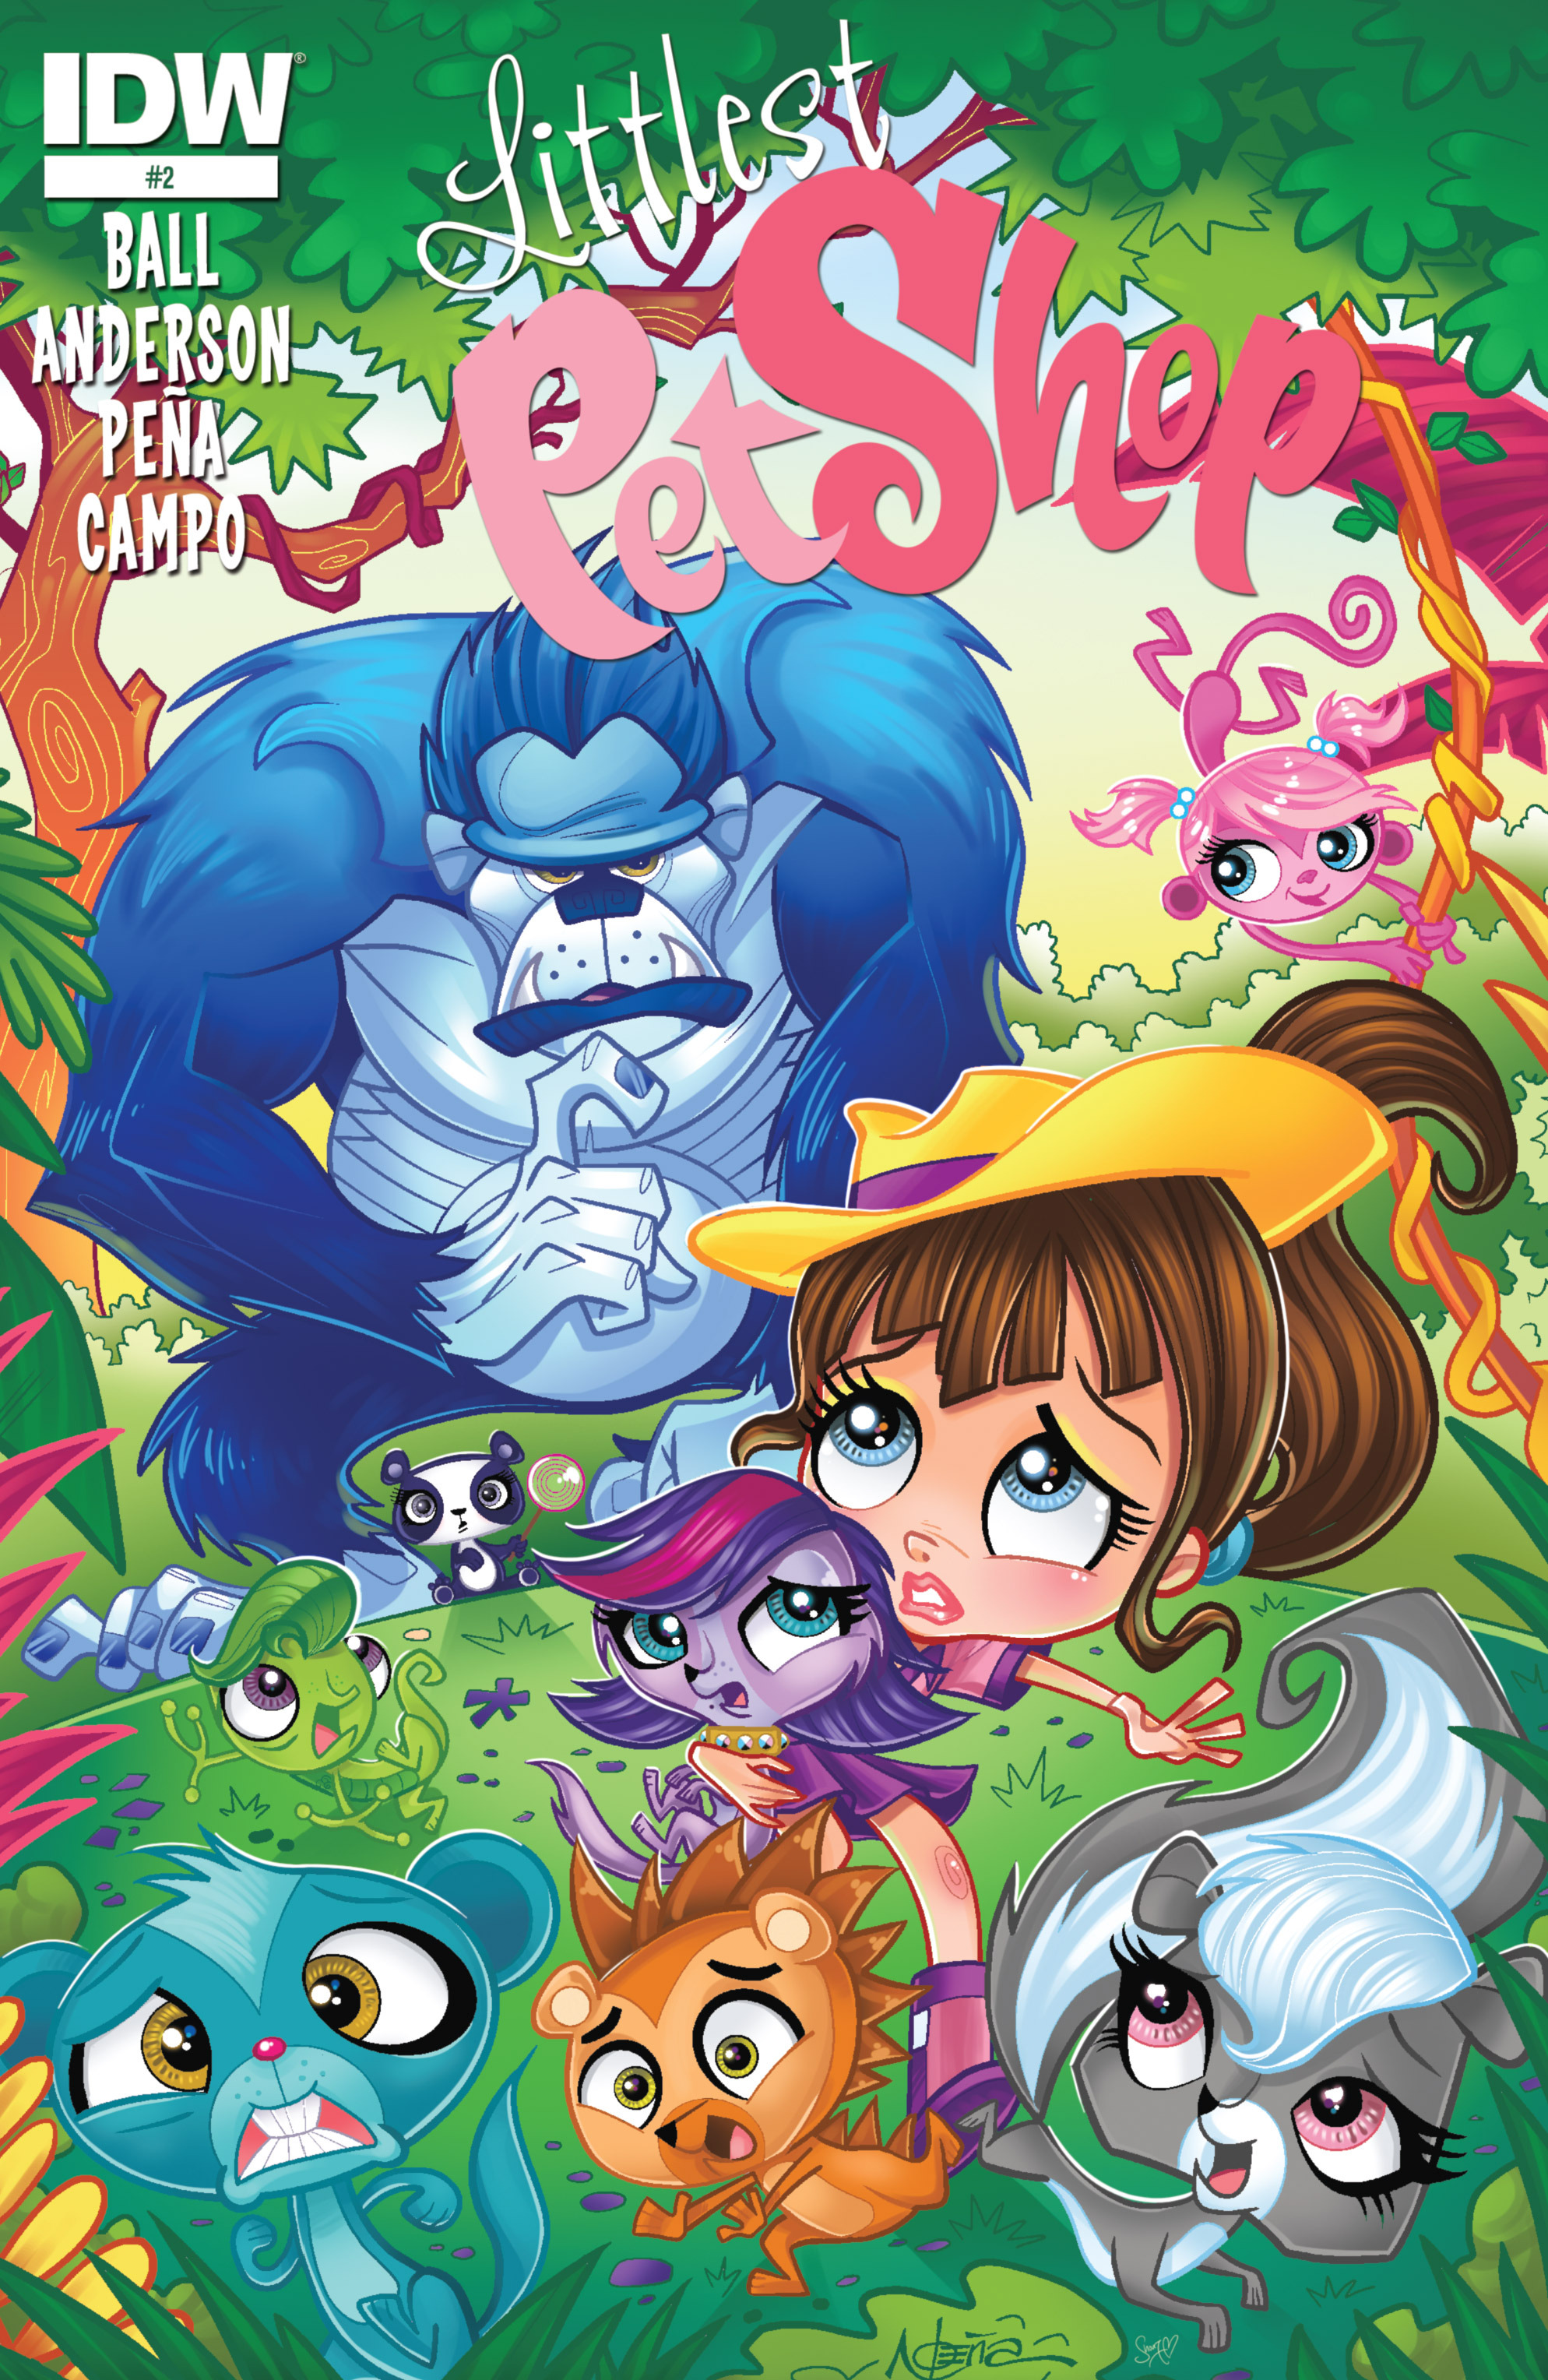 Littlest Pet Shop Issue 2 | Read Littlest Pet Shop Issue 2 comic online in  high quality. Read Full Comic online for free - Read comics online in high  quality .